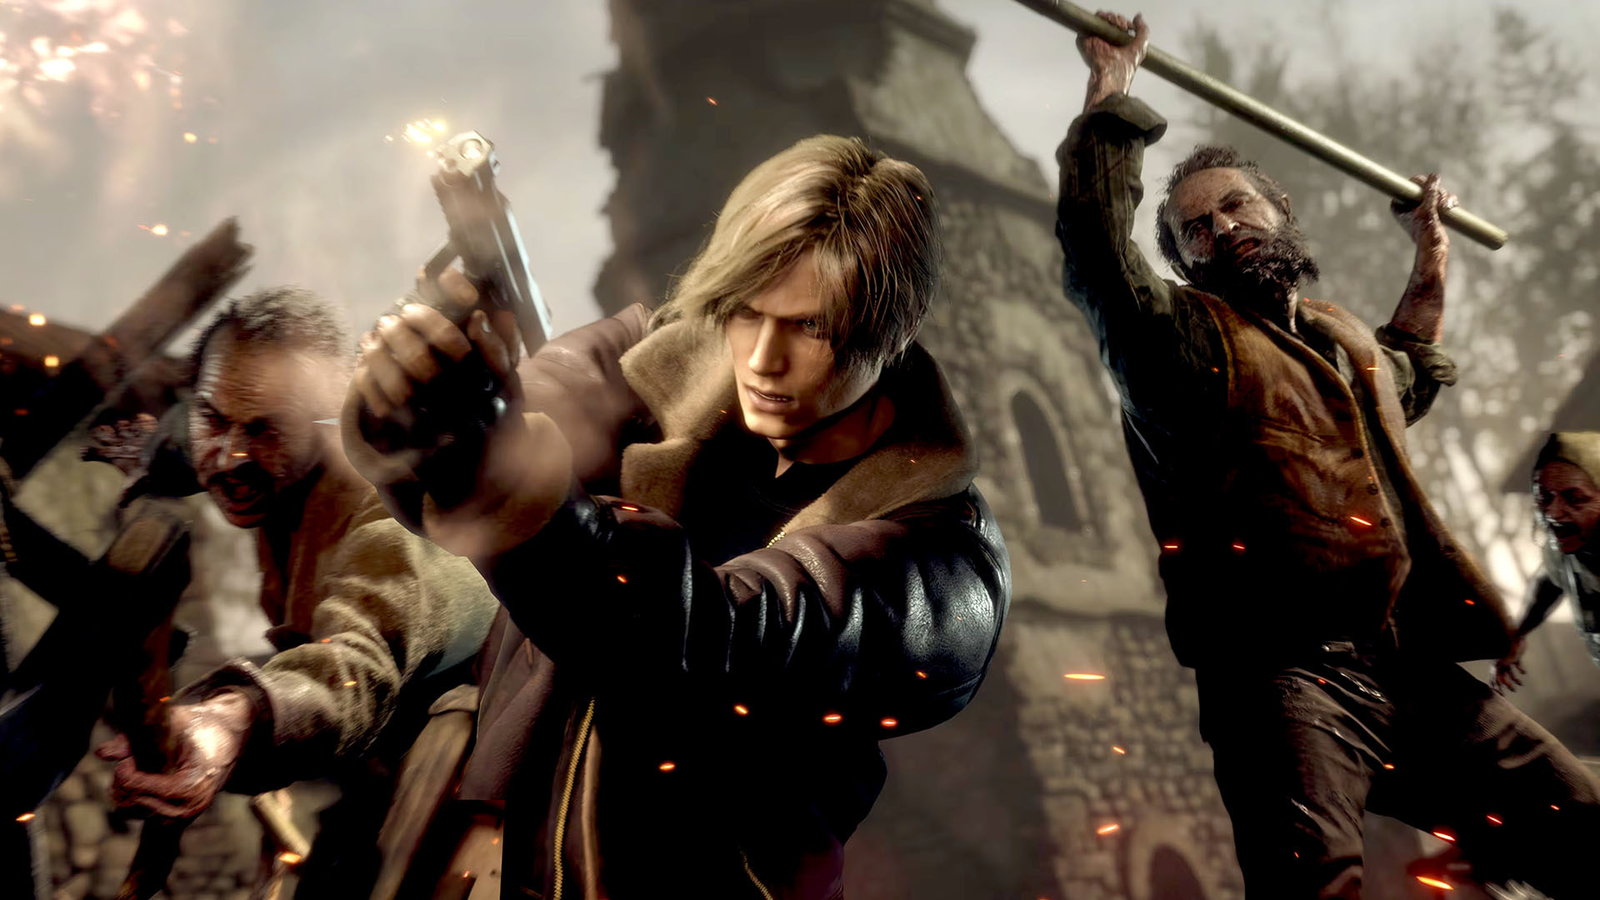 Resident Evil 4 Remake's latest patch brings meaningful